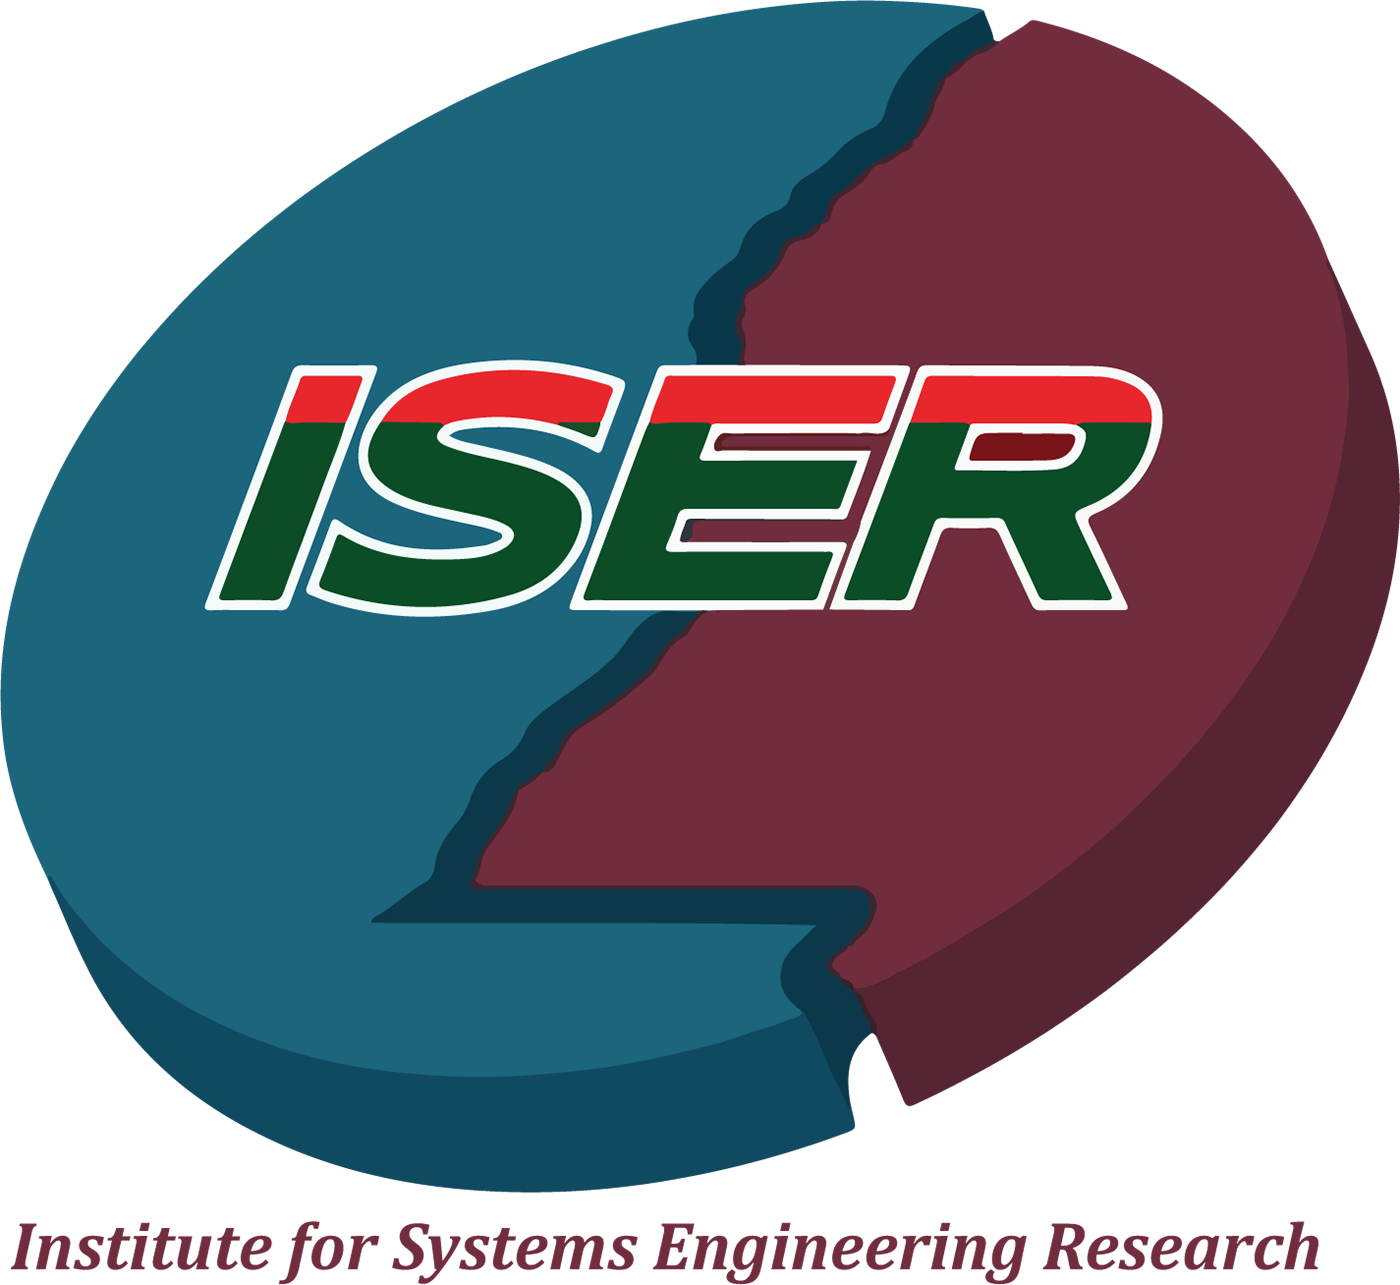 Institute for Systems Engineering Research